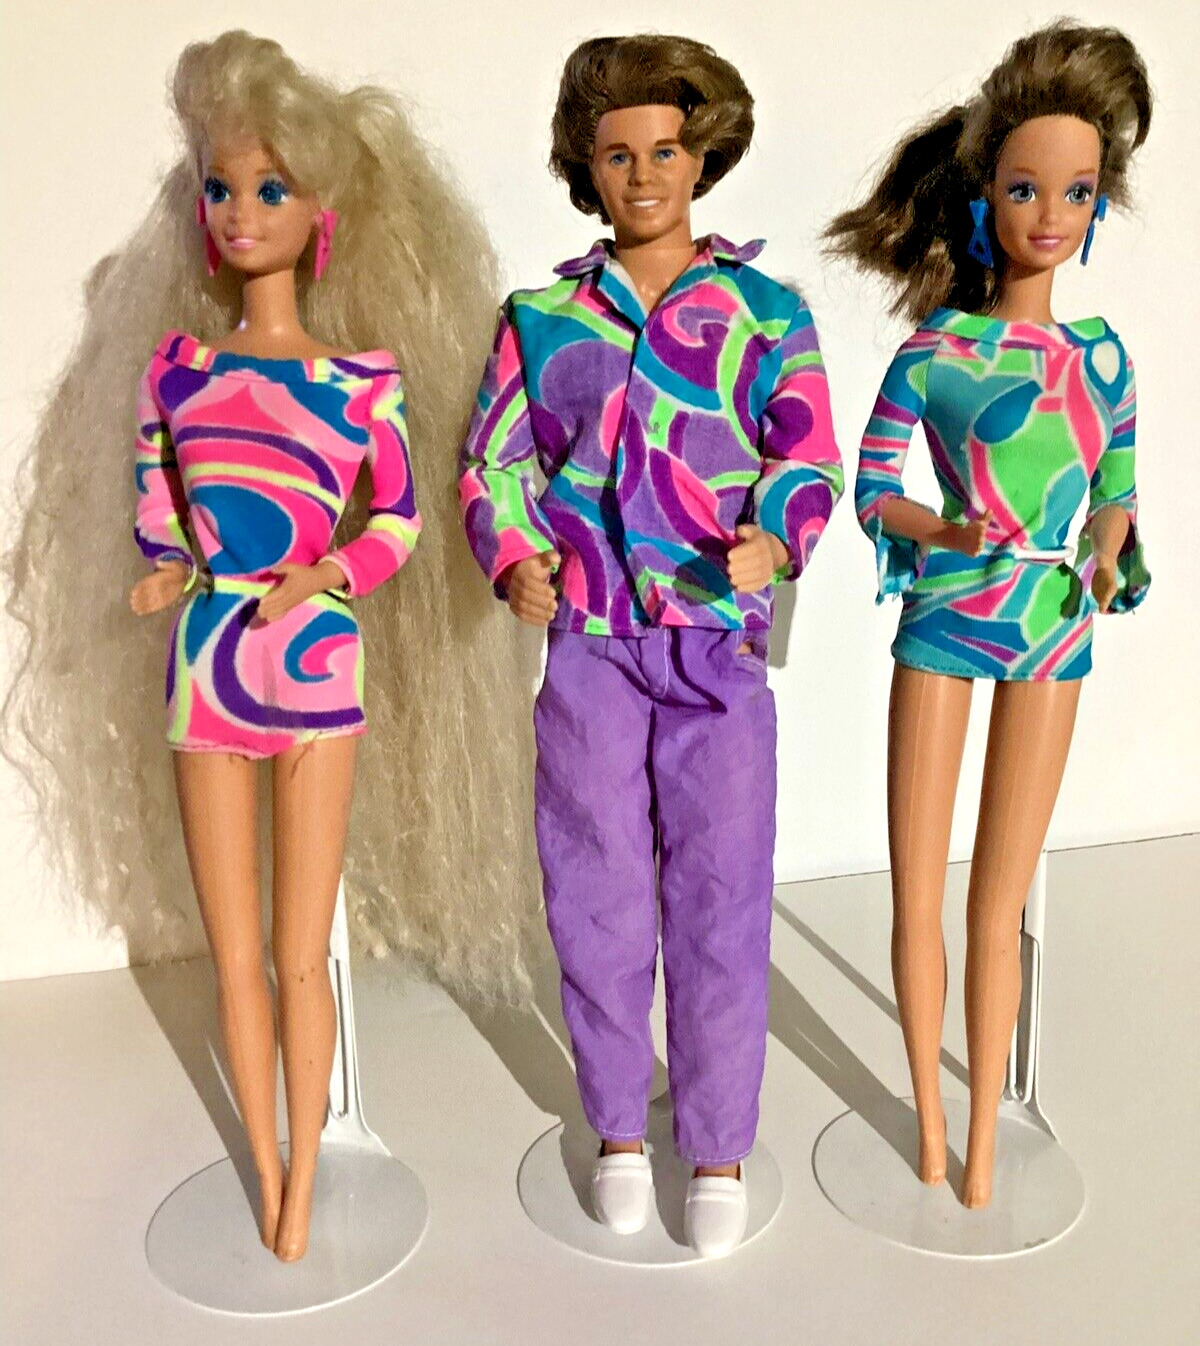 Vintage 1991 Totally Hair Barbie LOT of 3 Dolls Blond, Brunette and Ken WOW